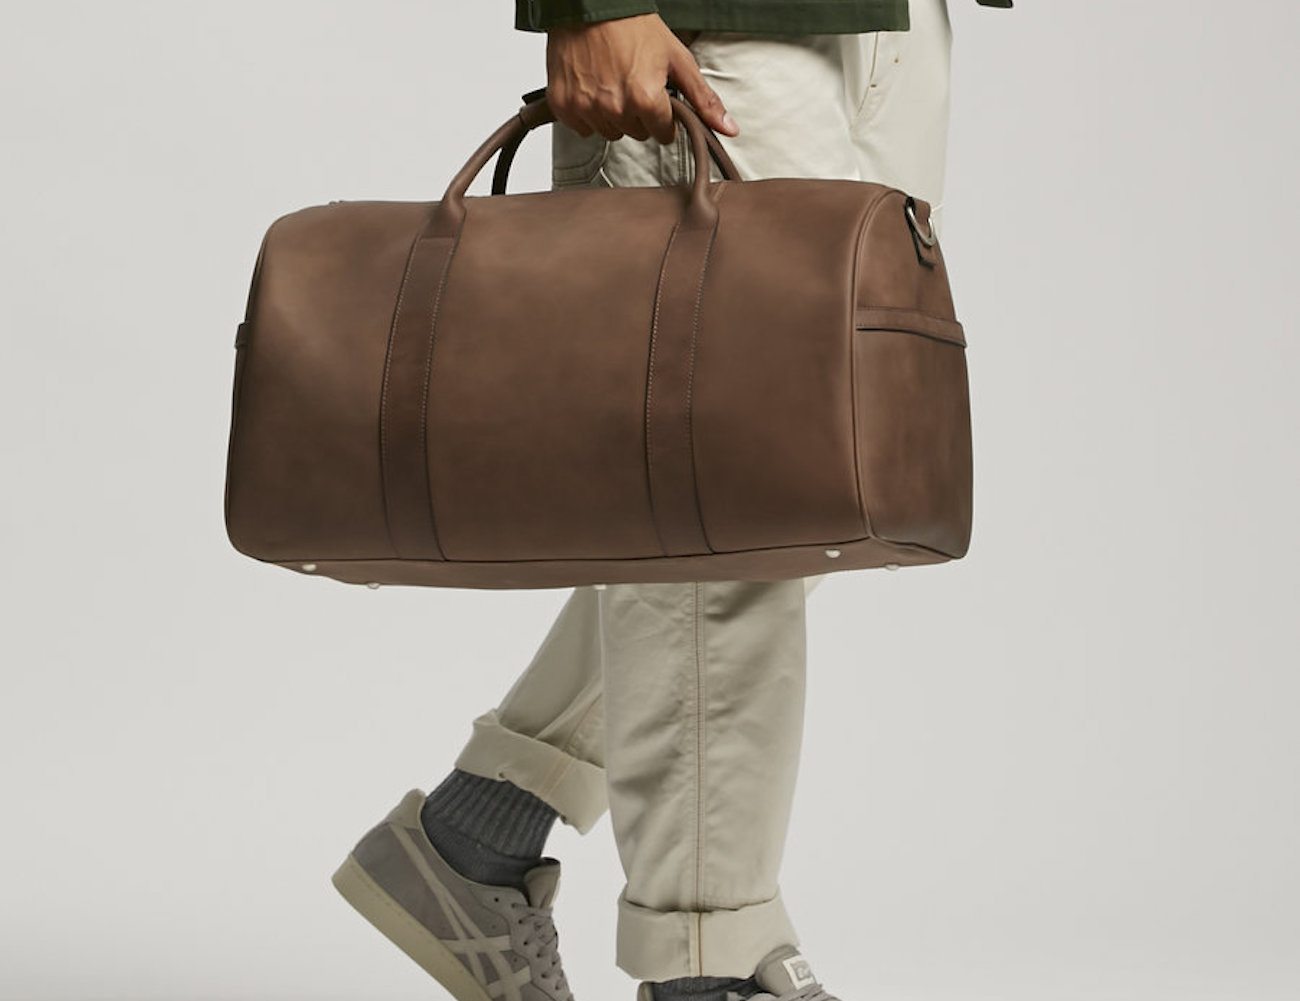 Luxury Leather Duffle Bag by JackThreads Review » The Gadget Flow